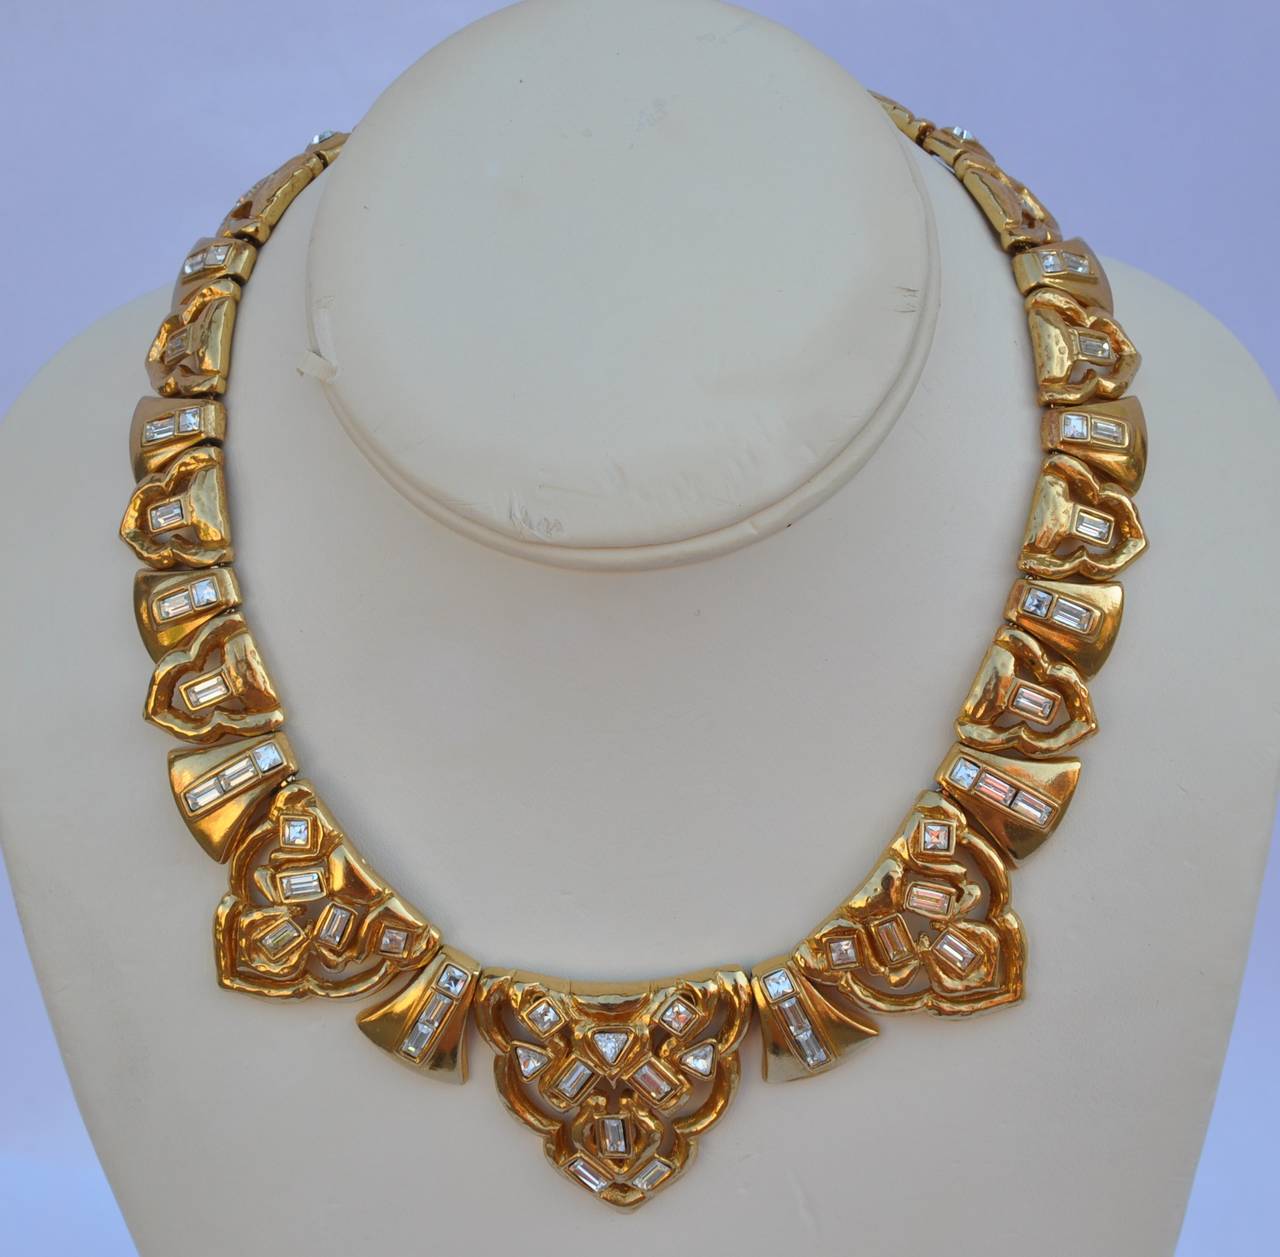 Yves Saint Laurent wonderfully detailed gilded gold vermeil finish thick necklace with matching earrings are accented with multi-size rhinestones. Both the necklace and matching earrings are signed on the backside. Besides the necklace being signed